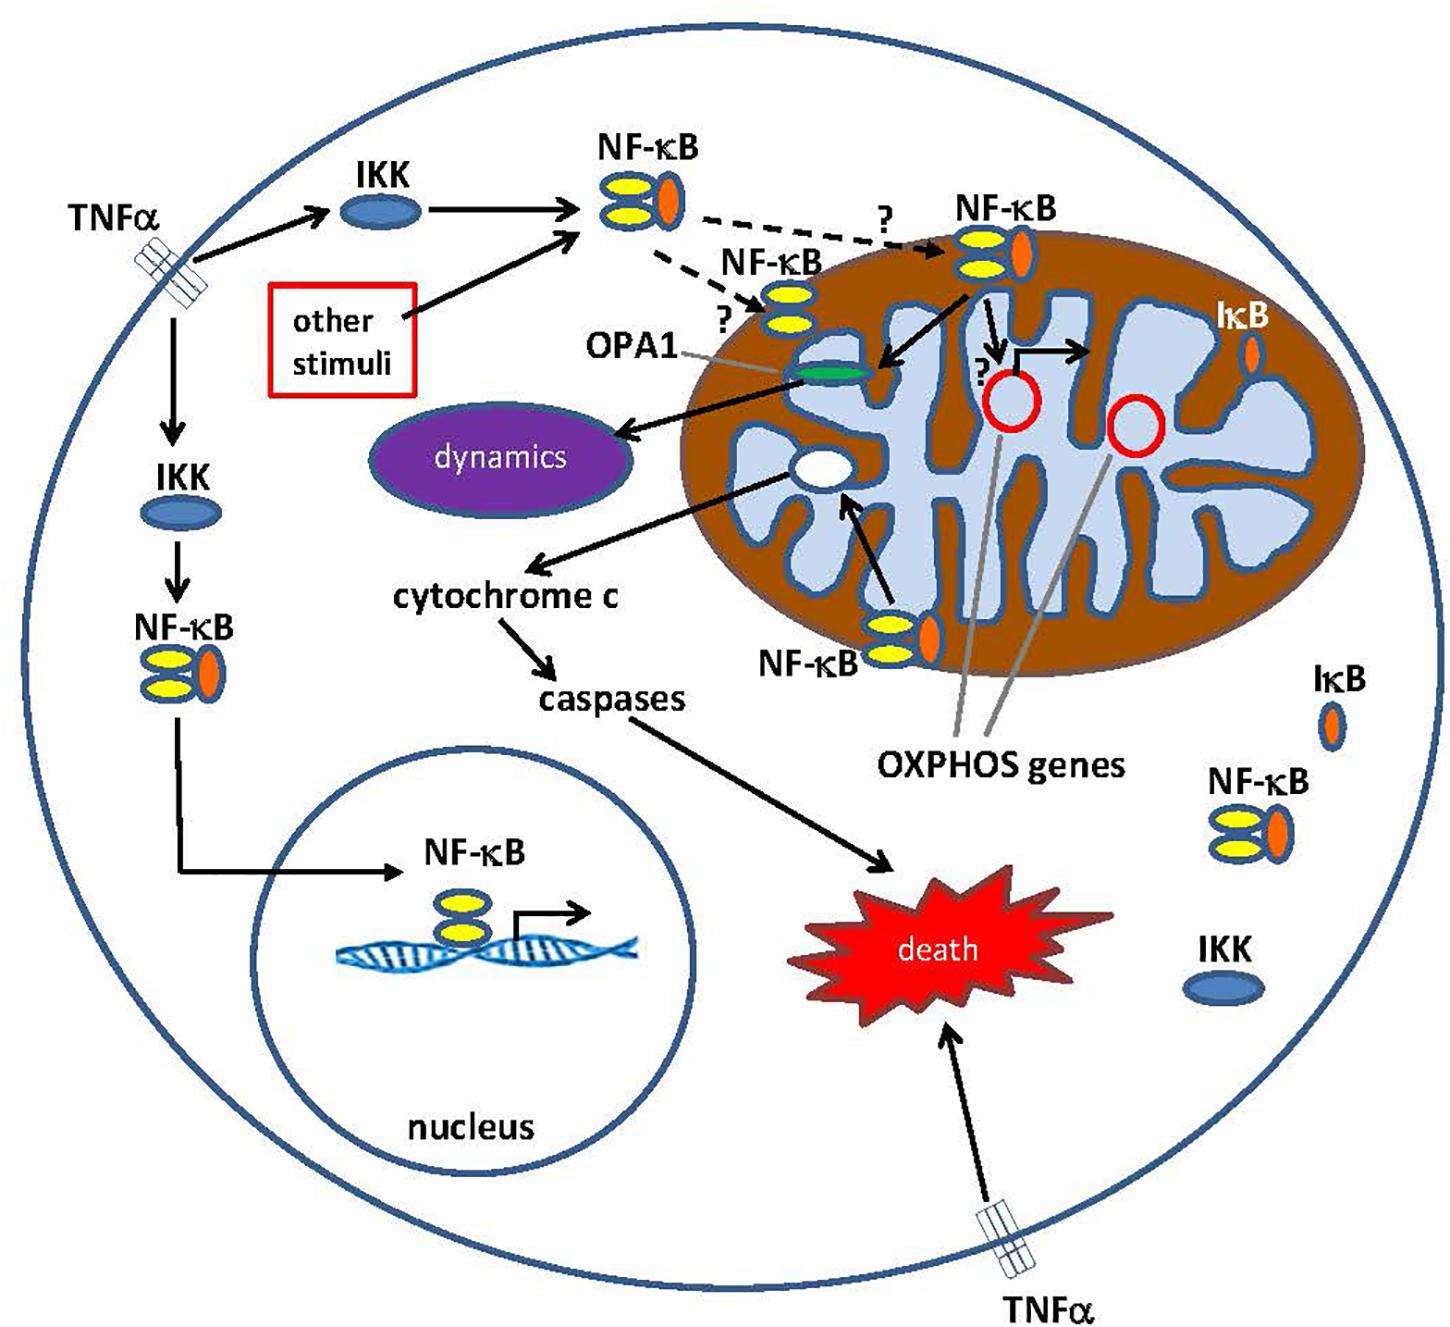 Frontiers | What Is Nuclear Factor Kappa B (NF-κB) Doing in and the Mitochondrion?